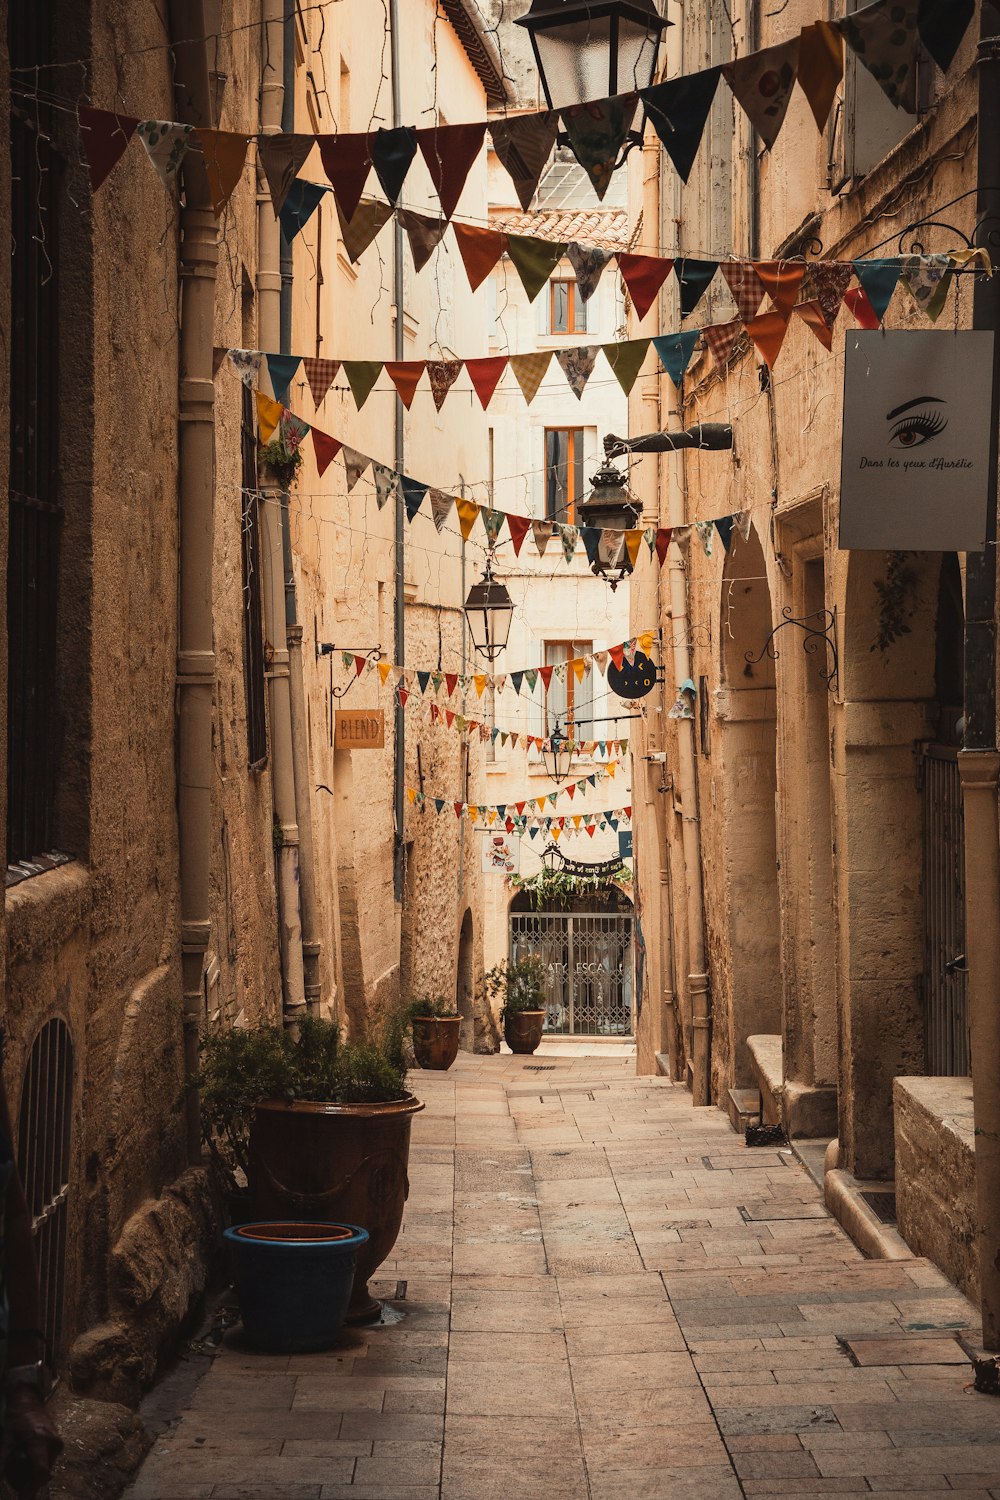 a narrow alley way with flags and potted plants